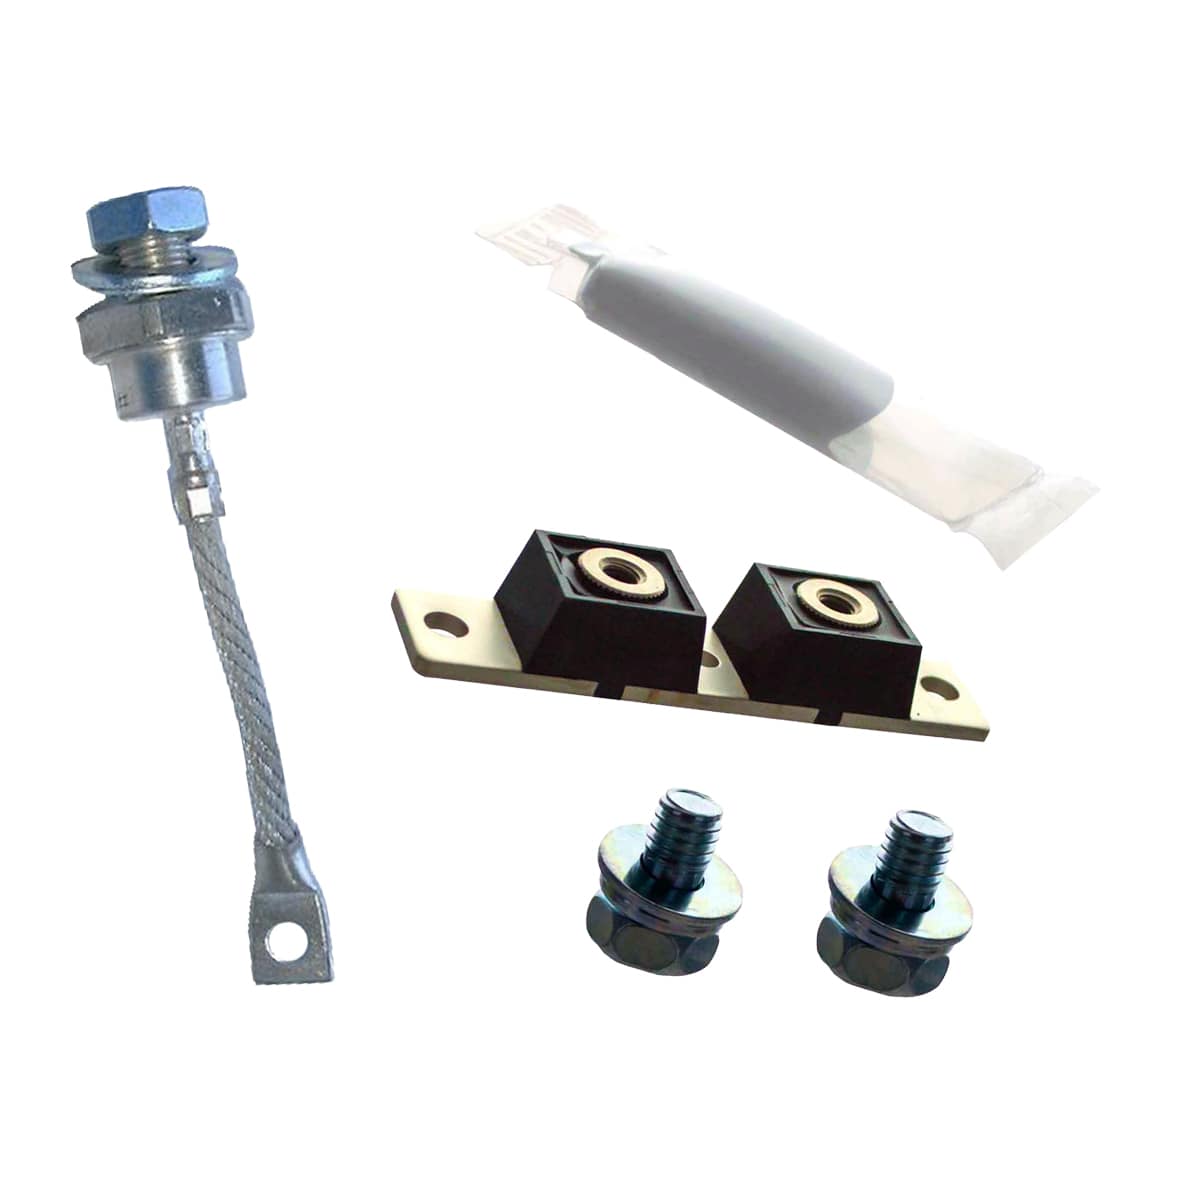 KIT ULTRA FAST DIODE. Part: 259419